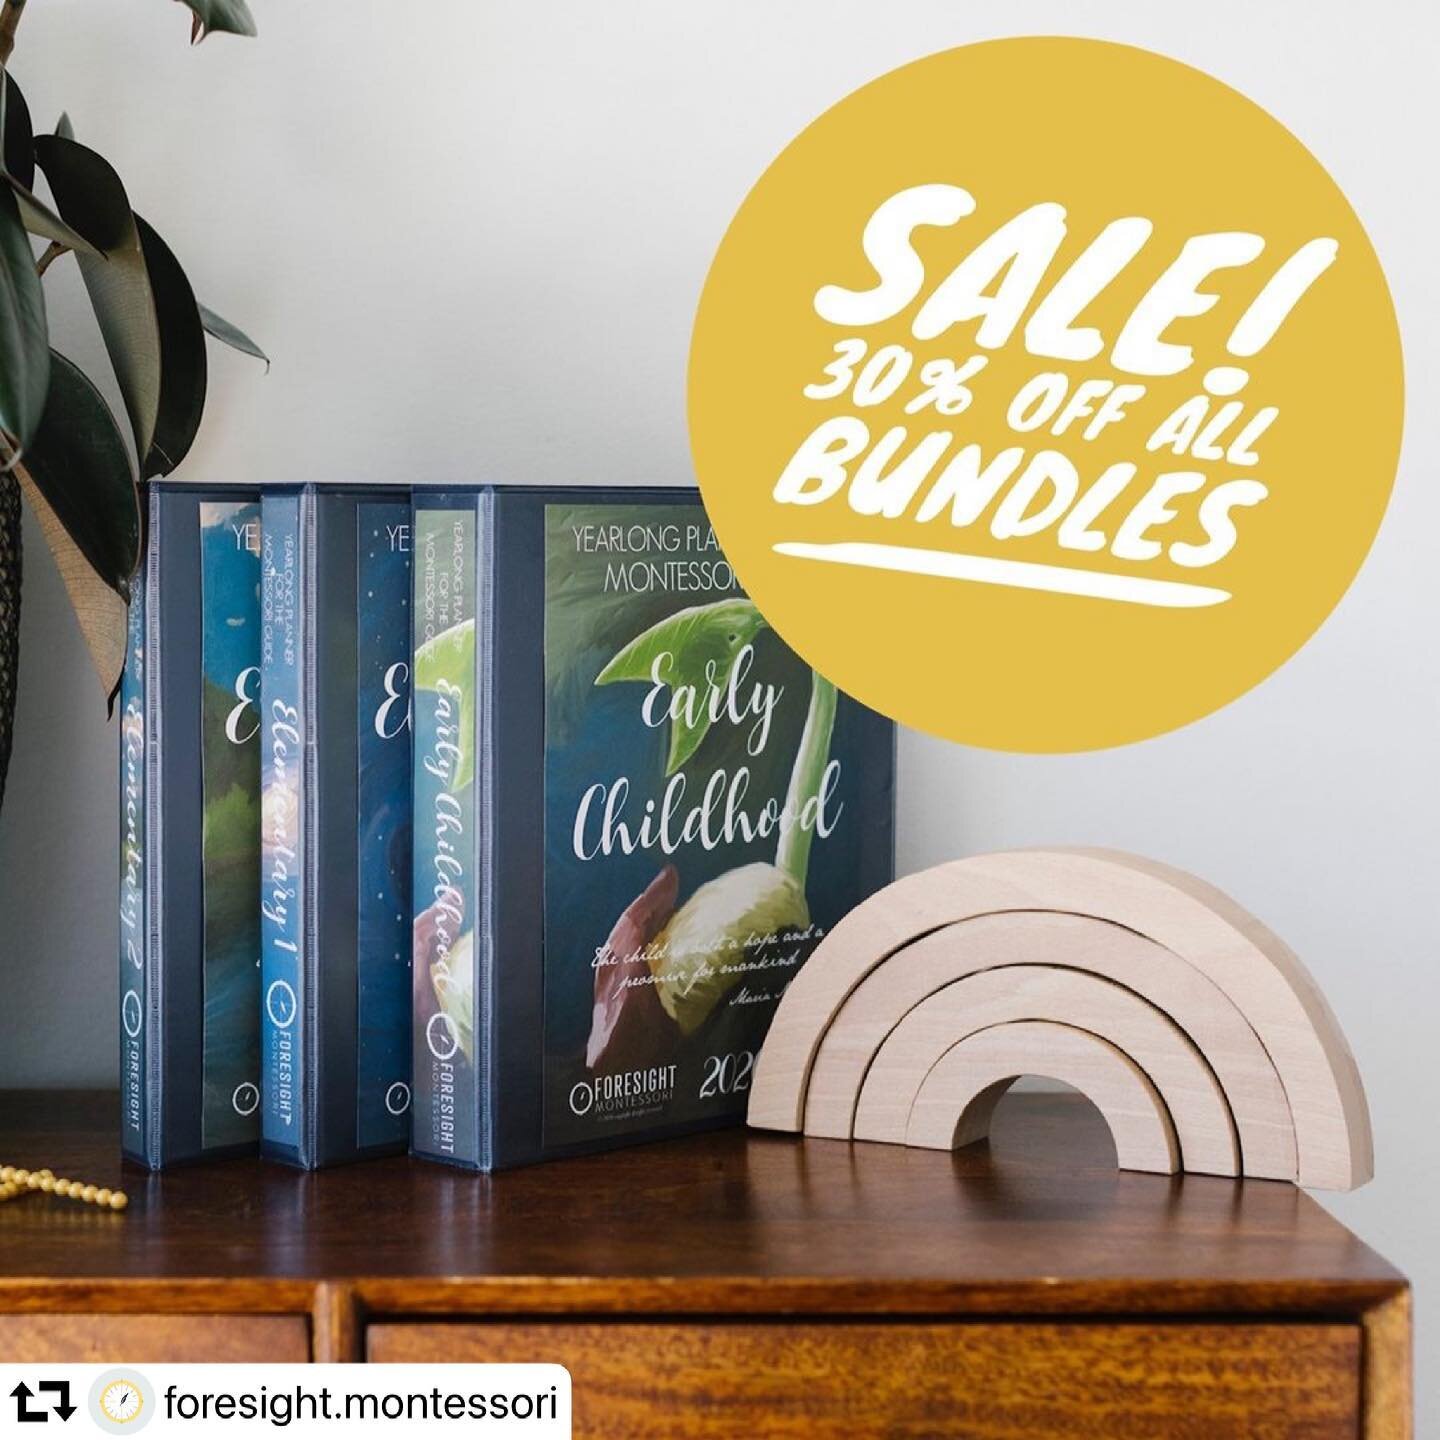 #repost @foresight.montessori
・・・
SPRING into planning SALE on ALL Planner Bundles! 30% OFF

Why wait until Fall 2021? Purchase a Planner Bundle and get started on your planning and recording NOW! 

What is included? You get a 21/22 School year plann